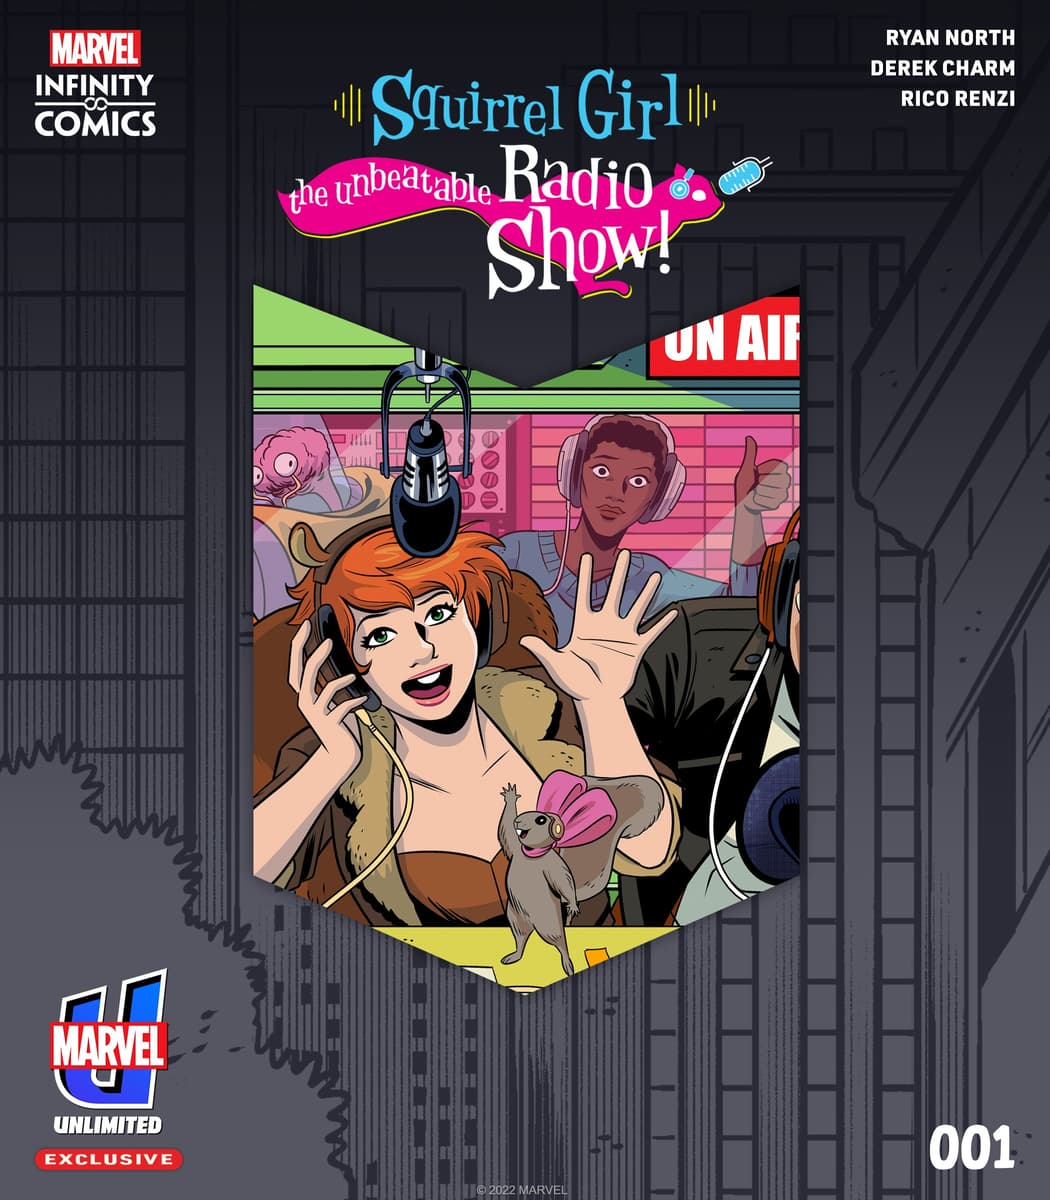 Squirrel Girl Infinity Comic Announcement Image